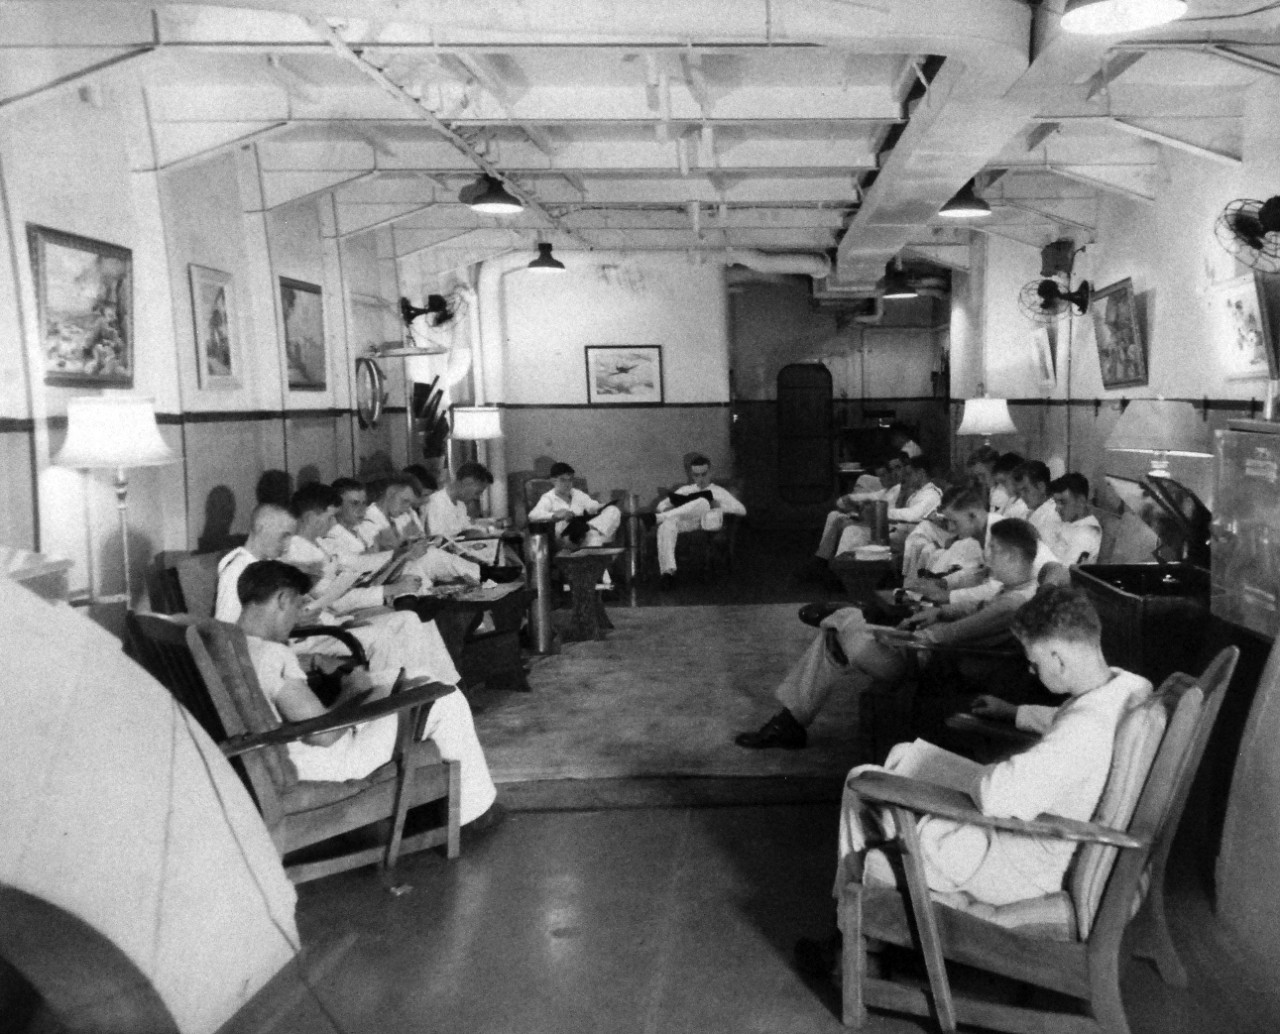 USS Leyte (CV-32), 1948   Crew’s lounge aboard the carrier.    Photograph released September 2, 1948.   Official U.S. Navy photograph, now in the collections of the National Archives.  (2016/11/15).